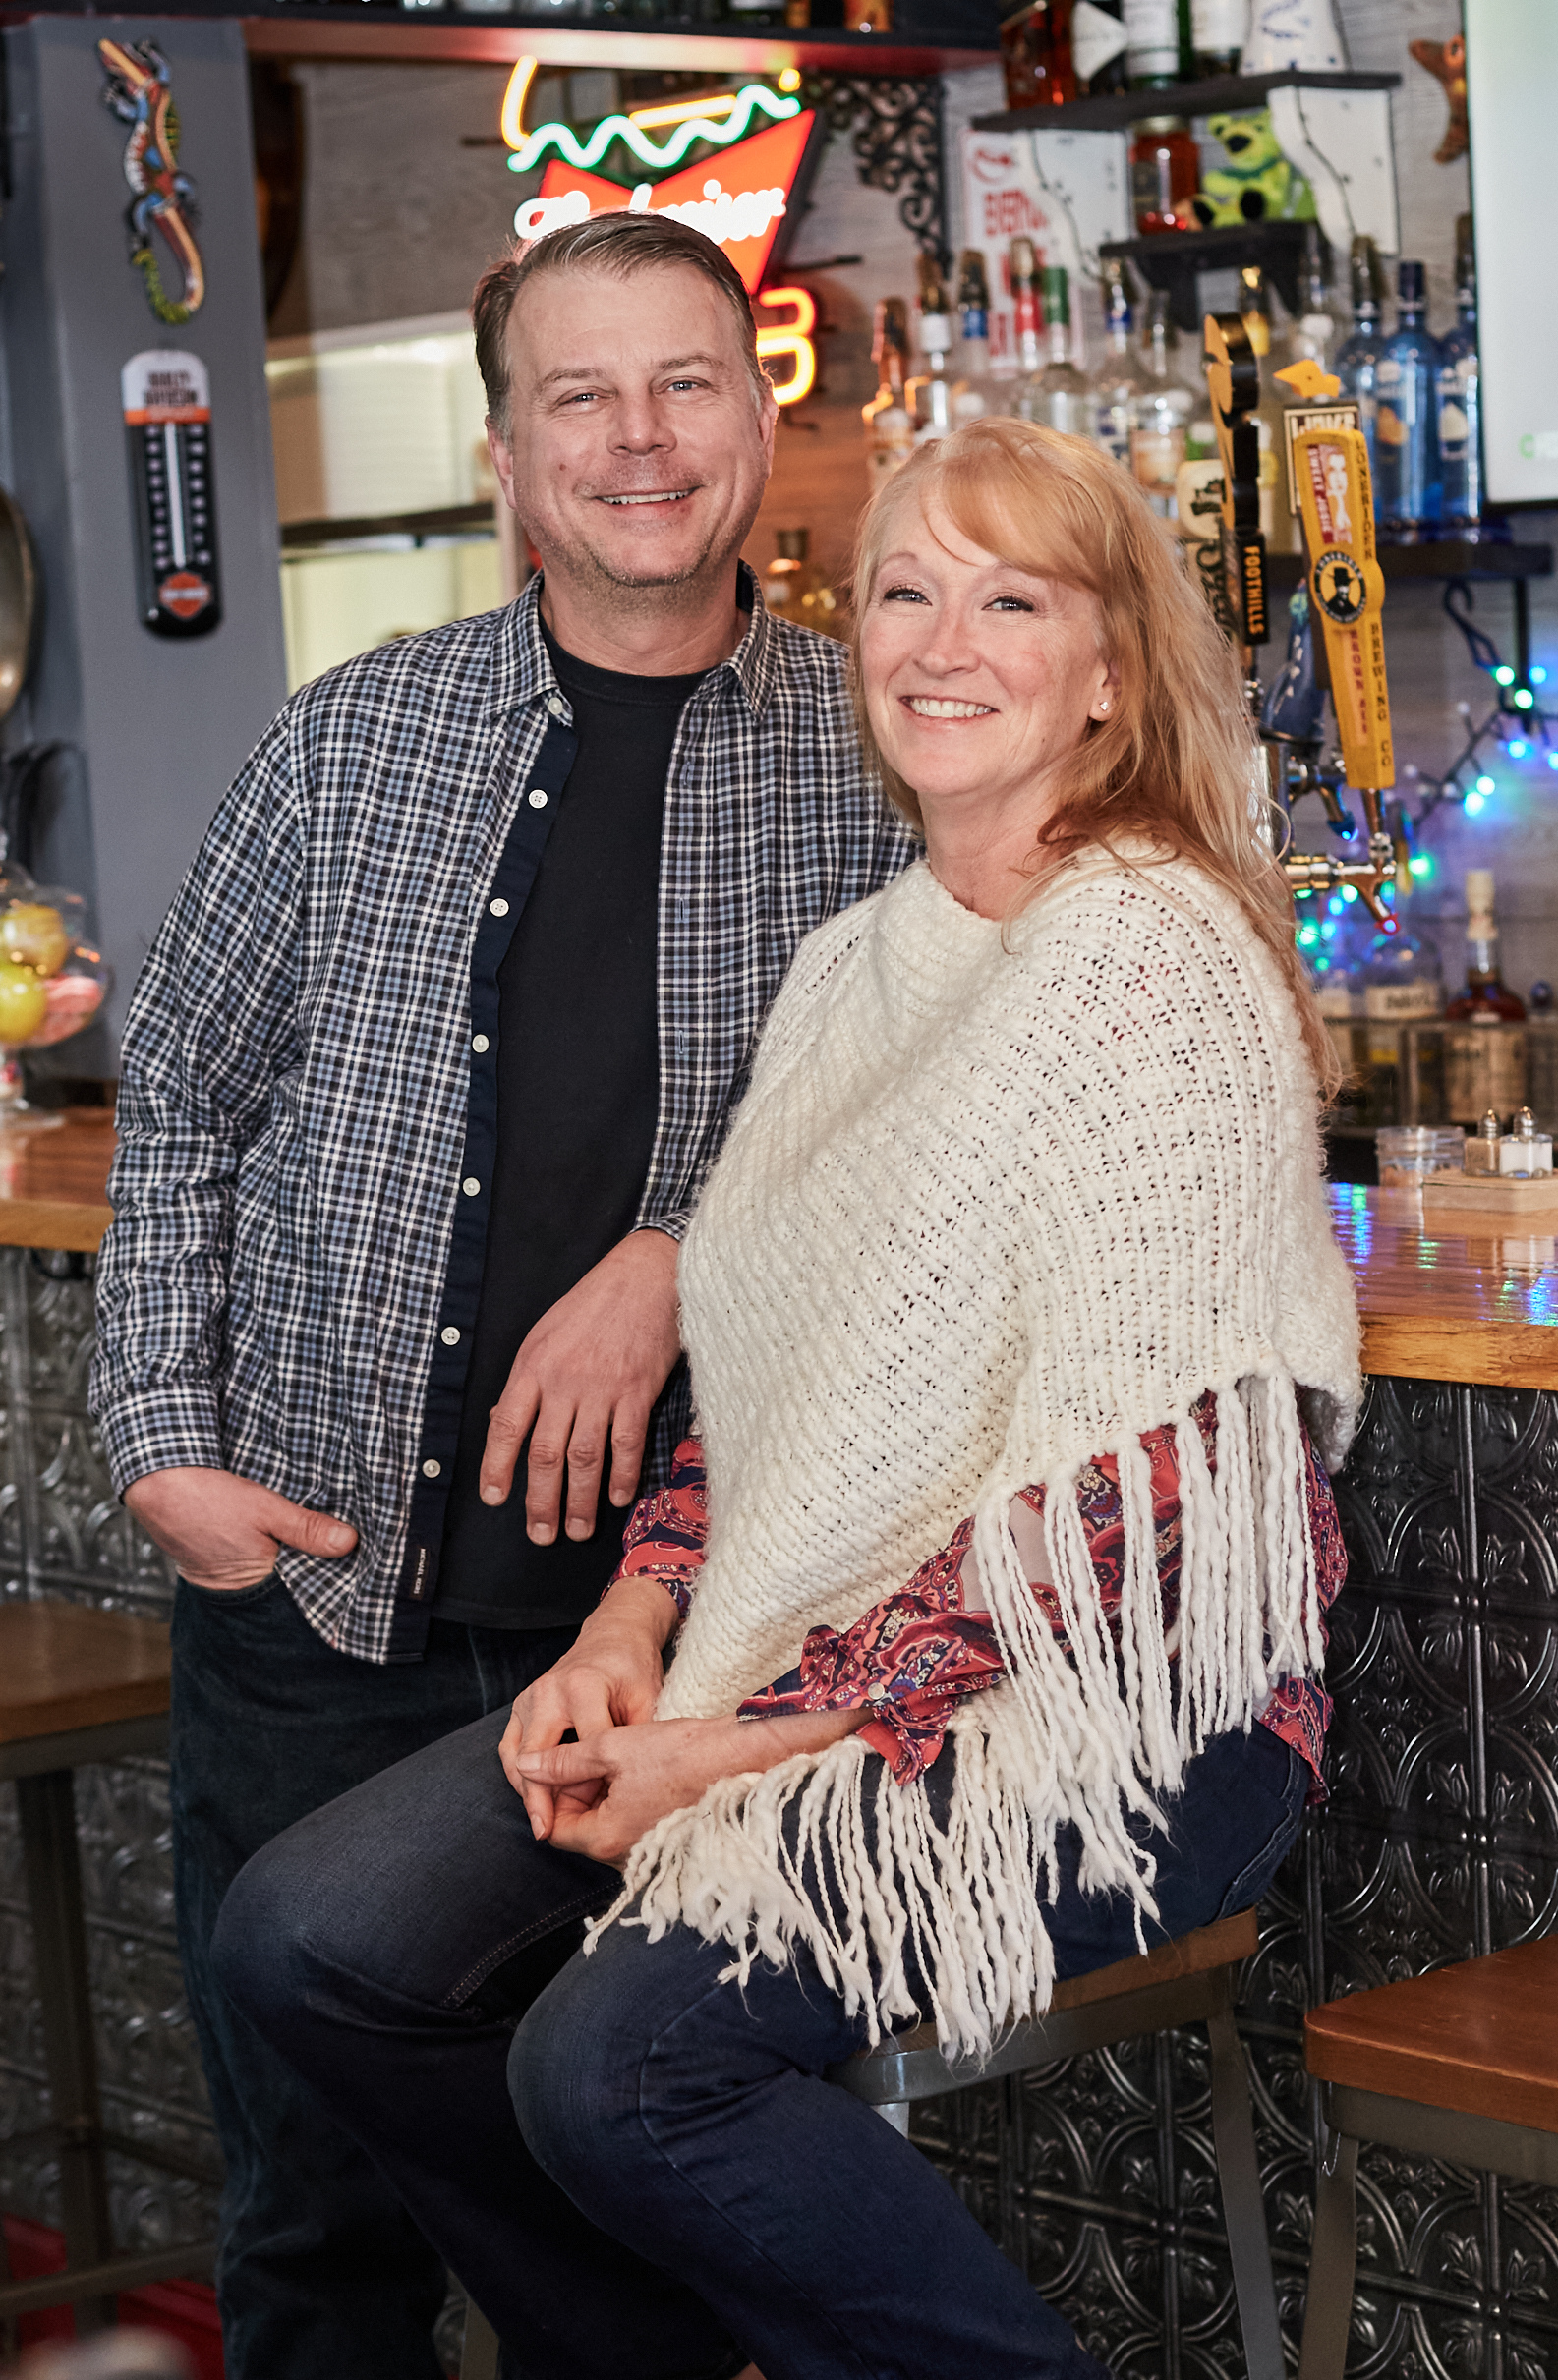 Eric Frady and Stacy Dunn, owners of Frady's Taphouse & Eatery.